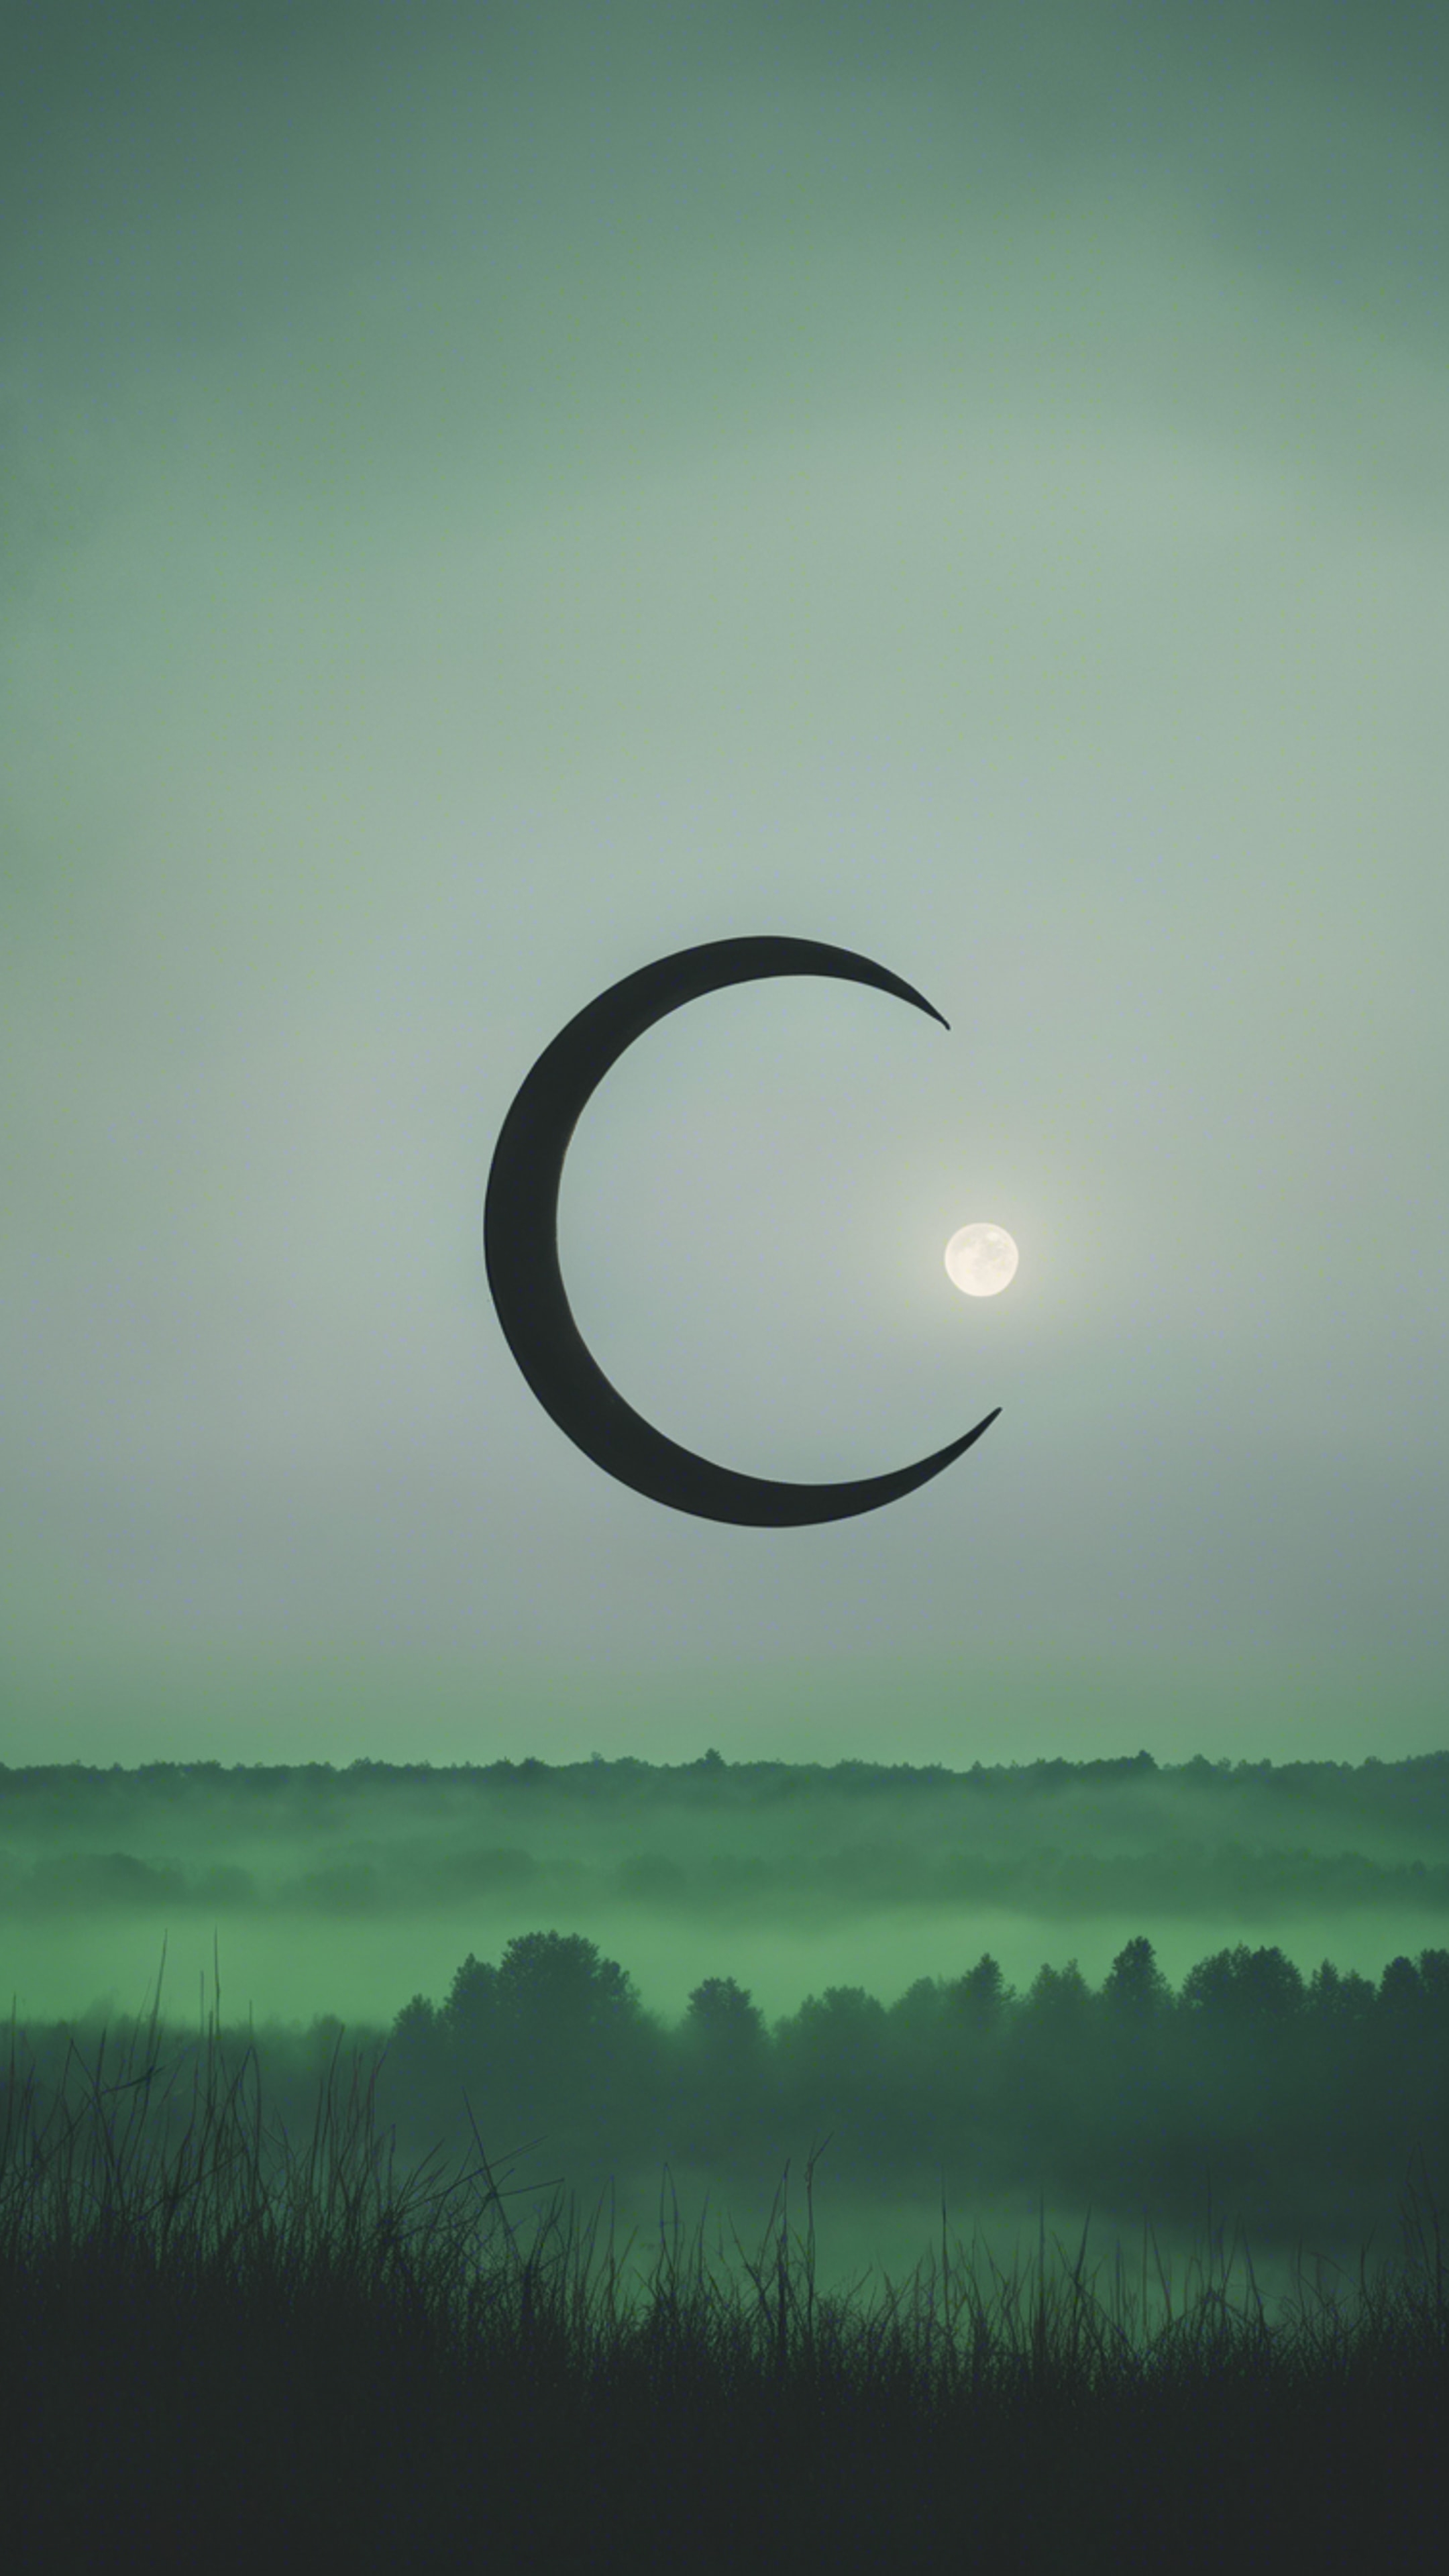 Gothic view of a black crescent moon under a green misty sky. Ταπετσαρία[13b0789ef30c4bbcb3bb]